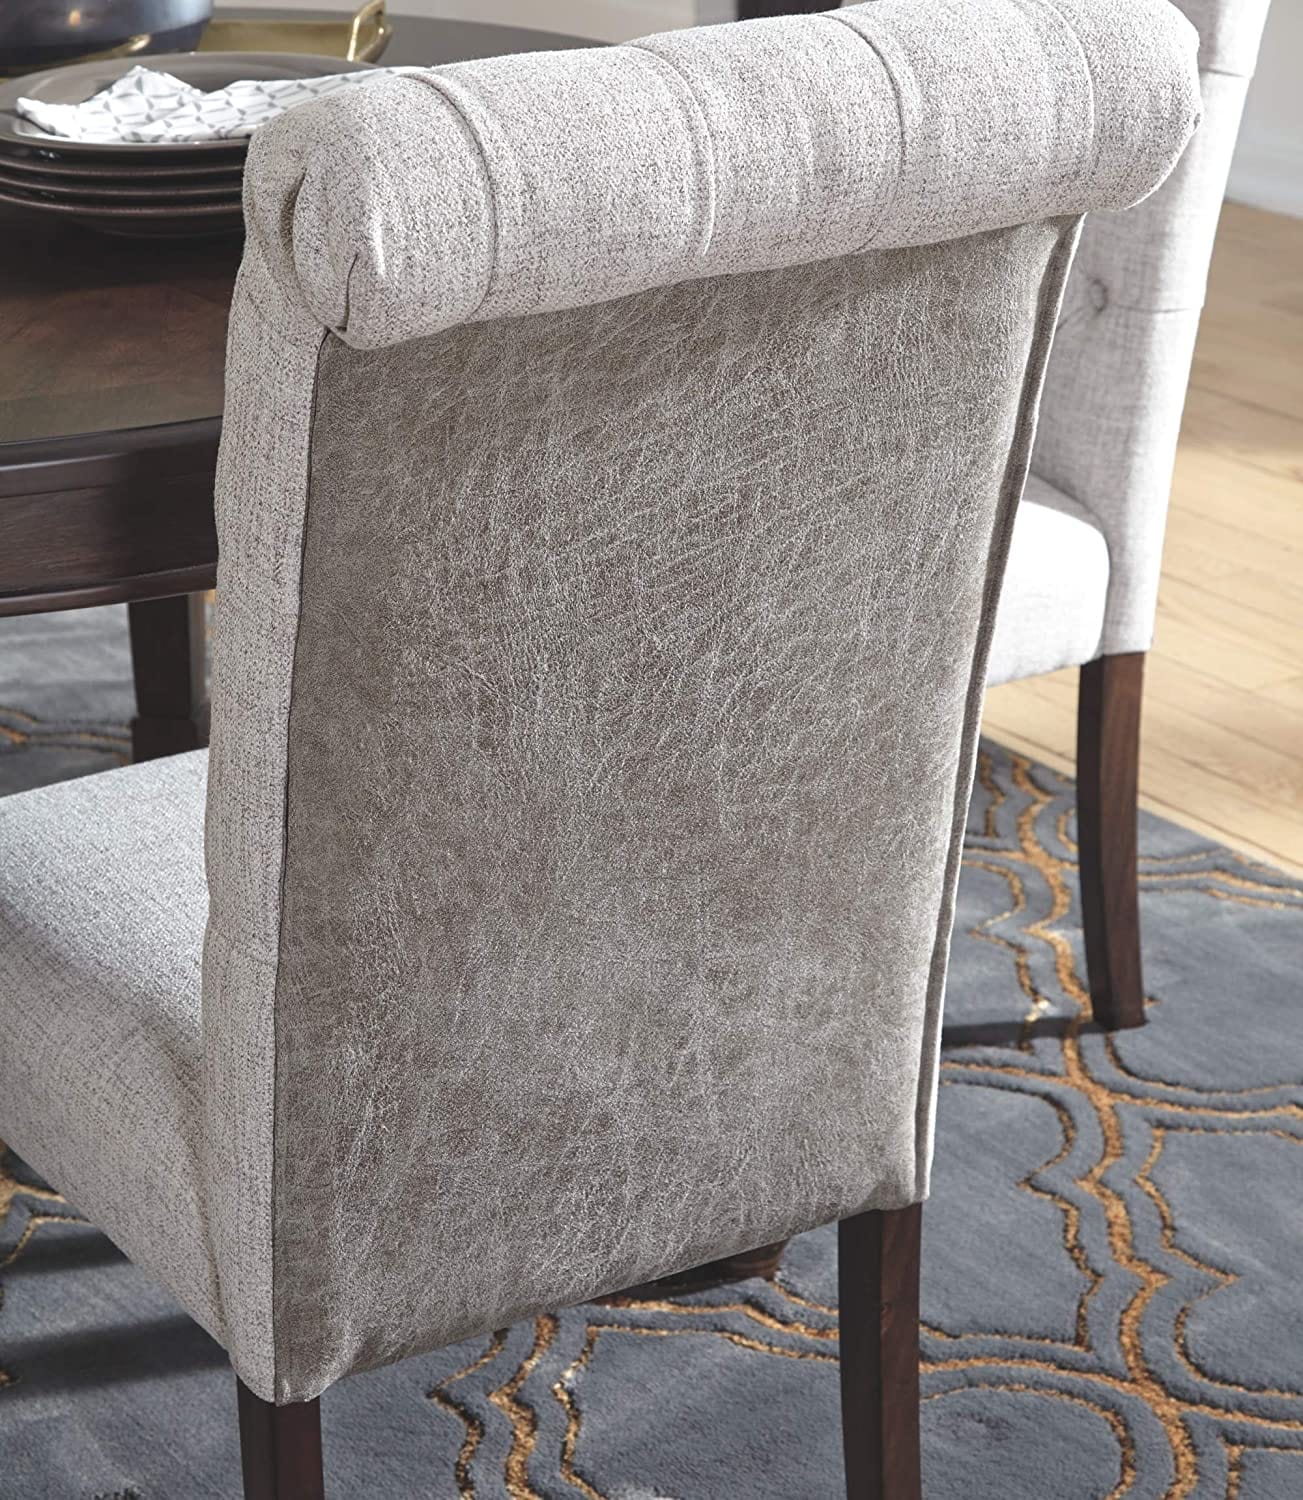 Classic Upholstered Dining Chair, Set of 2, Light Gray